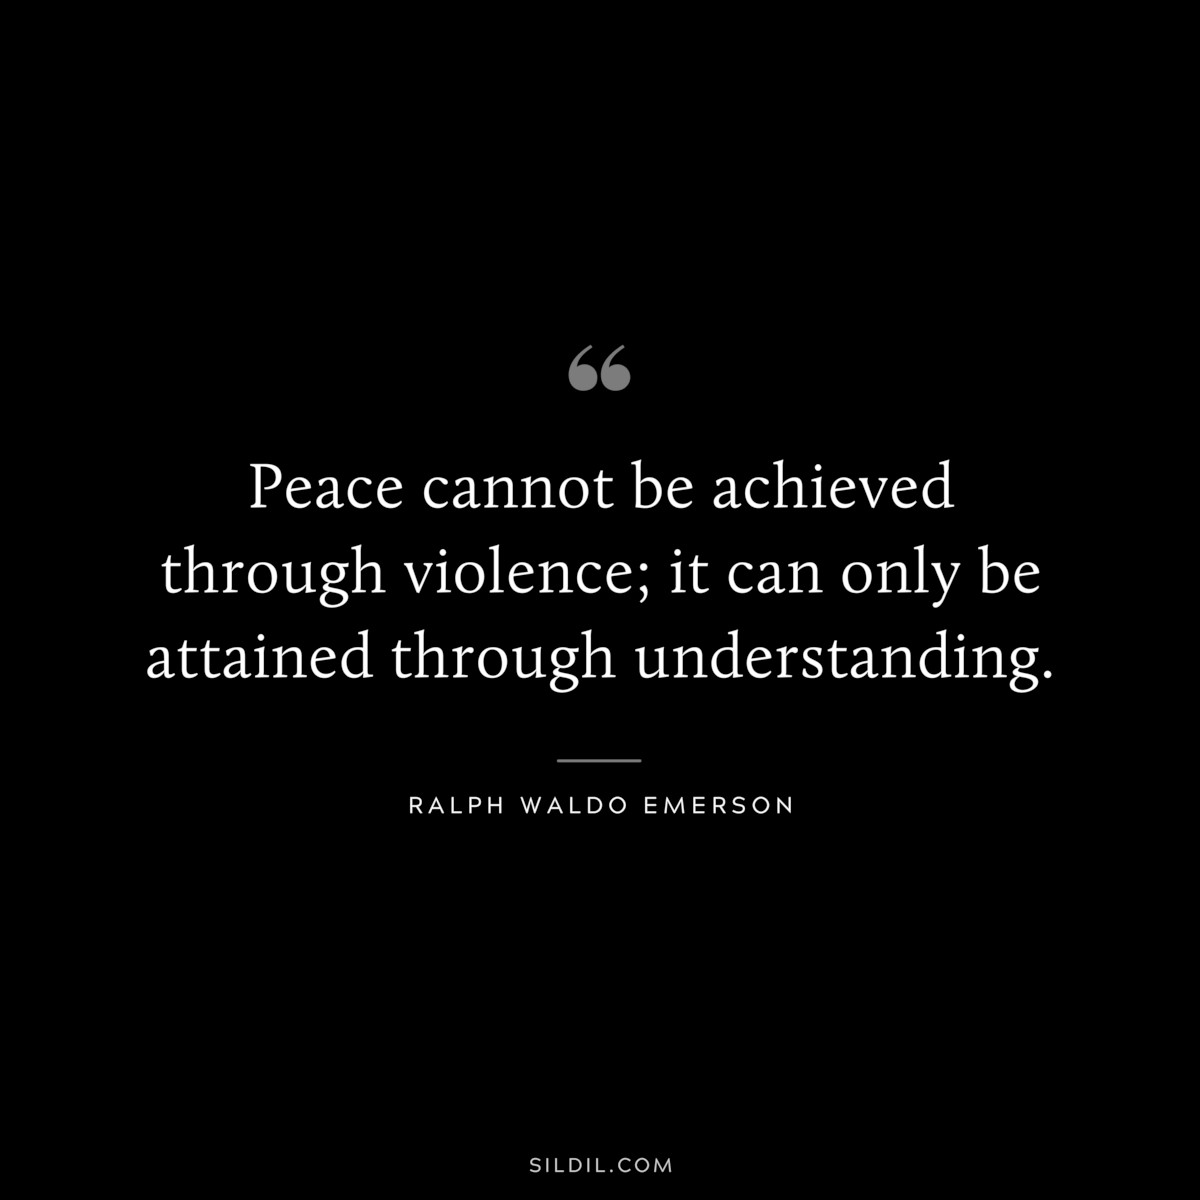 Peace cannot be achieved through violence; it can only be attained through understanding. — Ralph Waldo Emerson